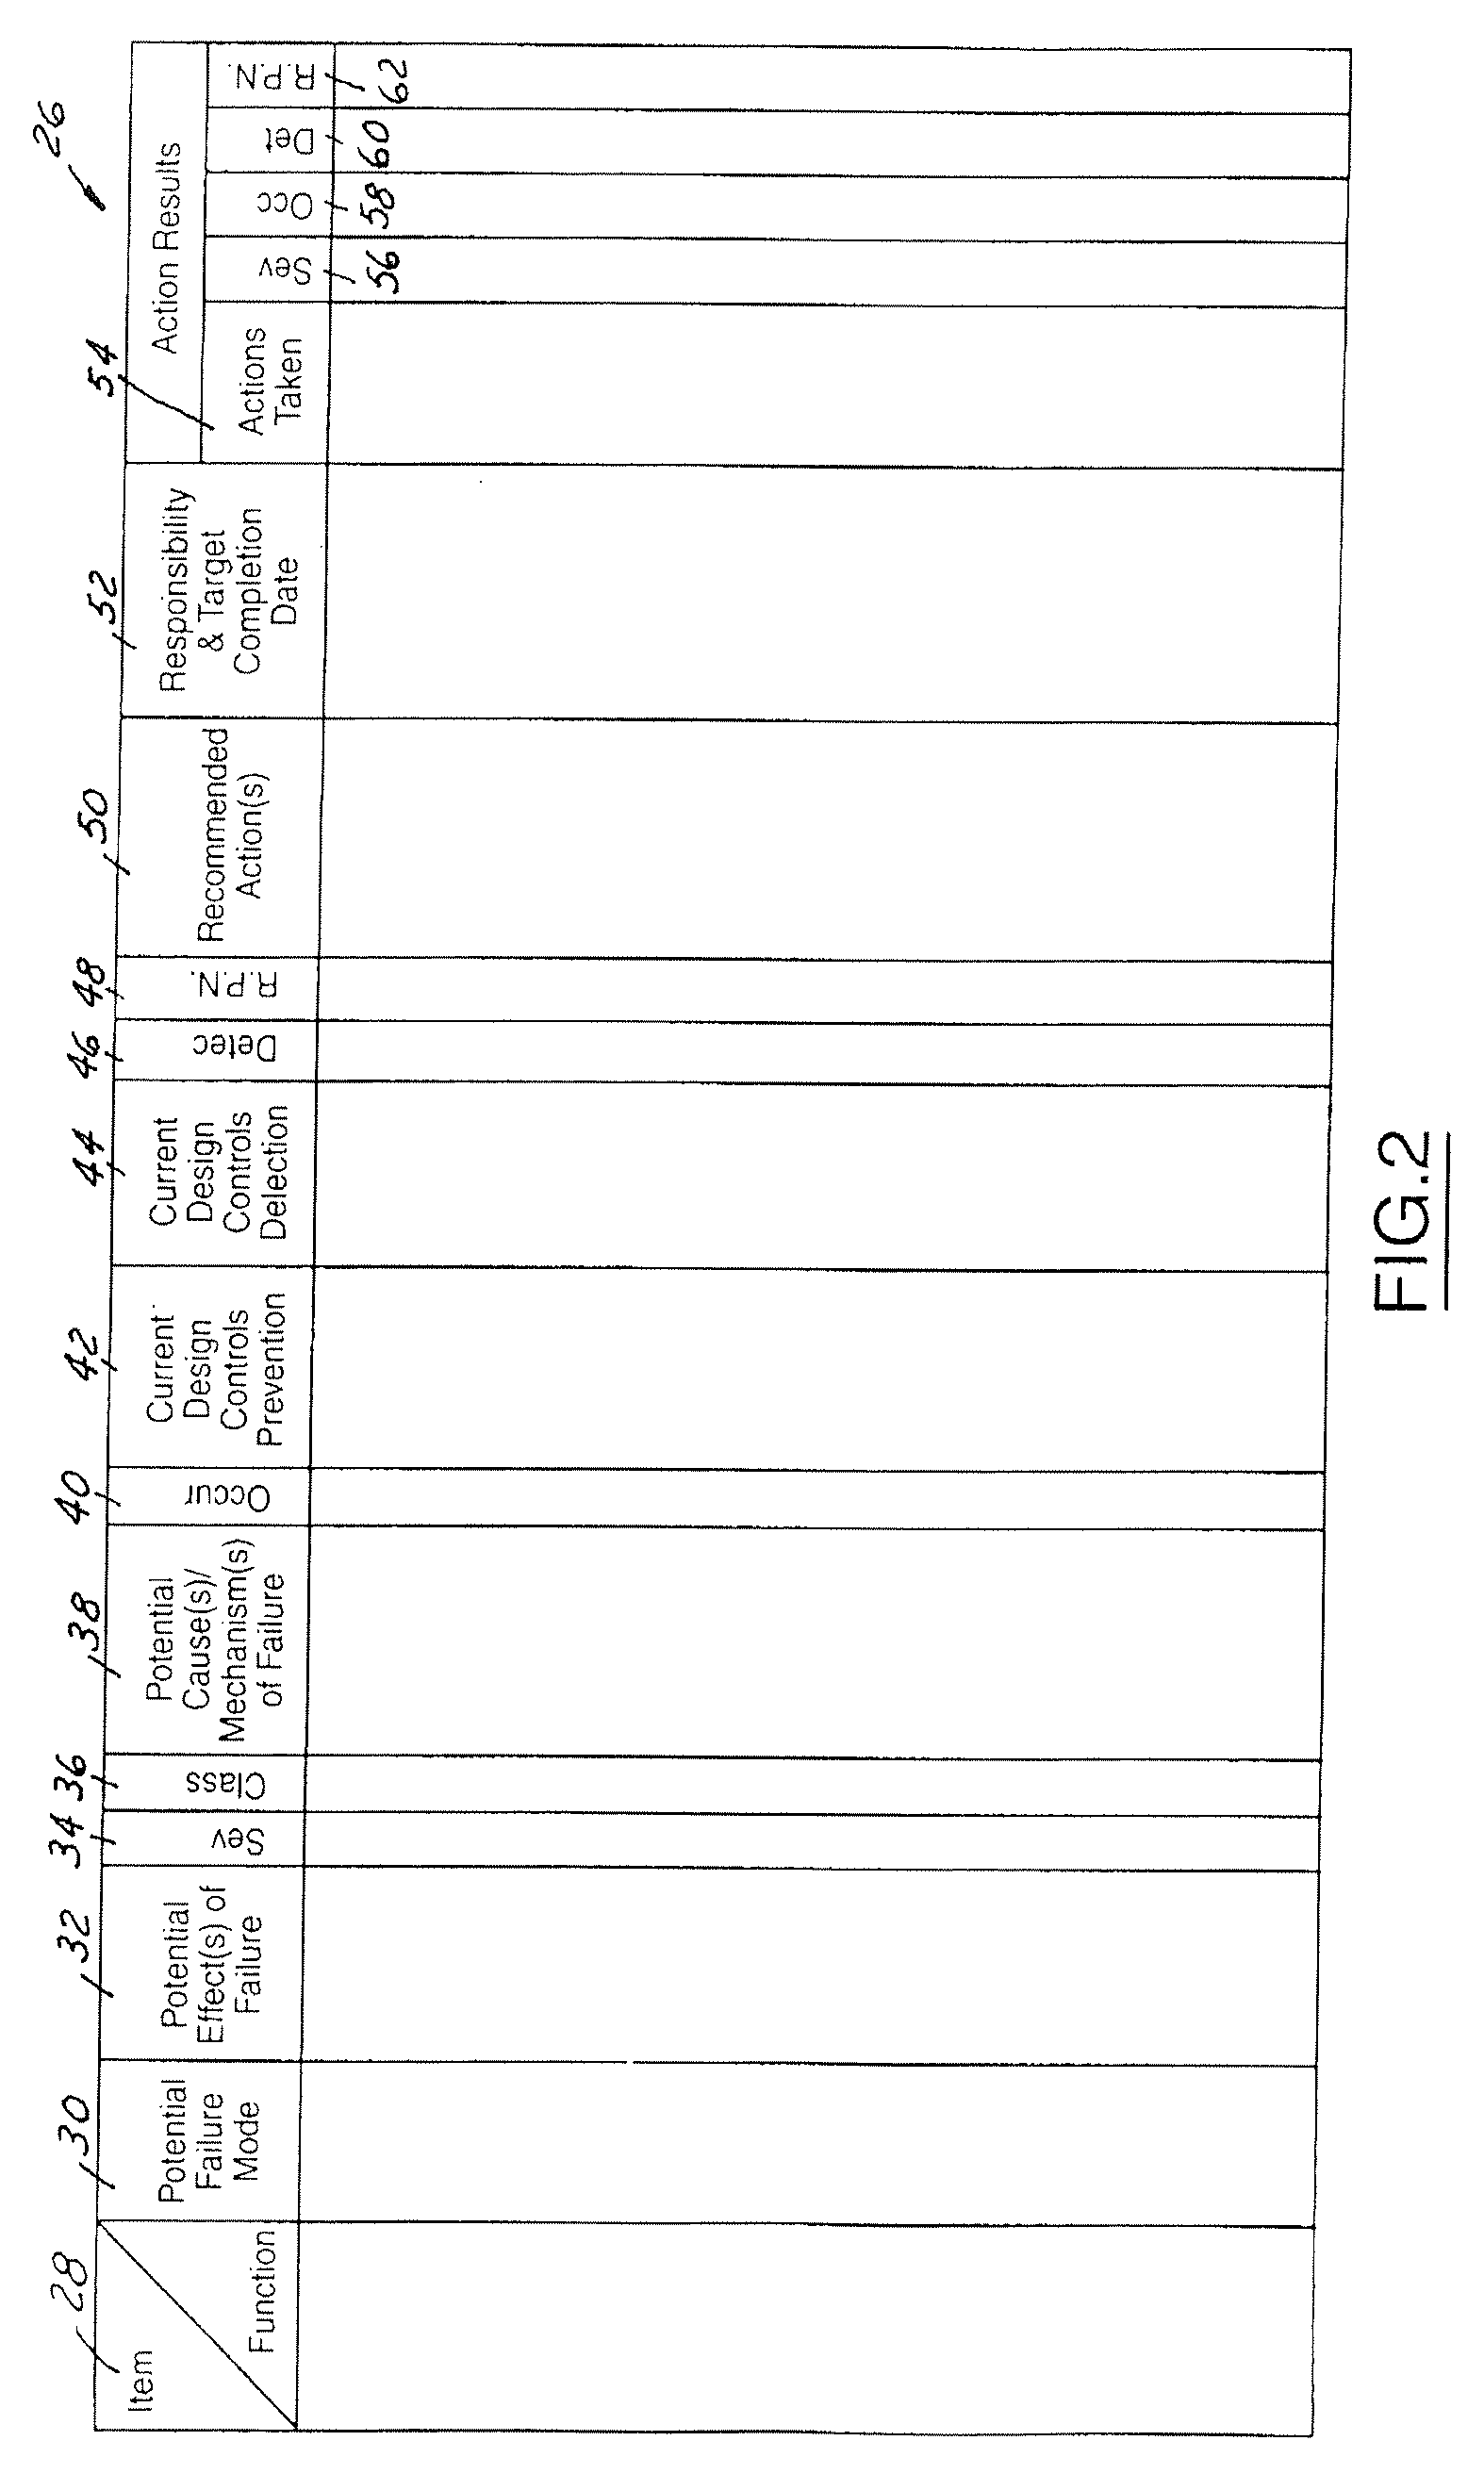 Method to facilitate failure modes and effects analysis